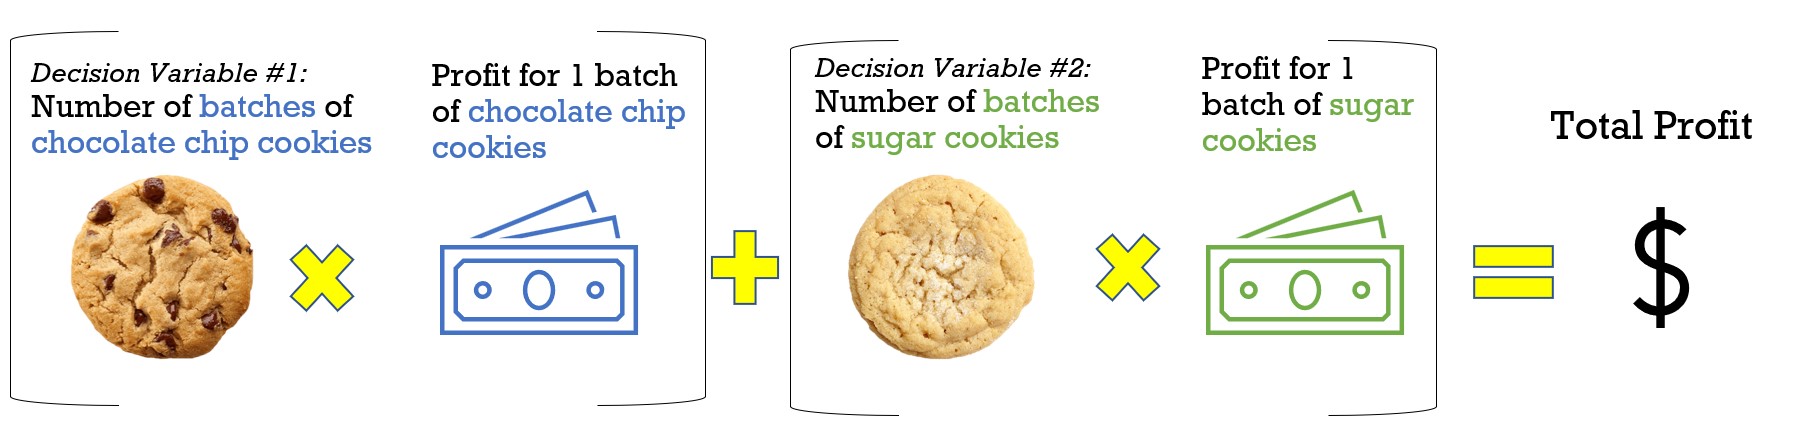 Image that shows the calculation of the objective function using the pictures of the cookies and the pictures of money